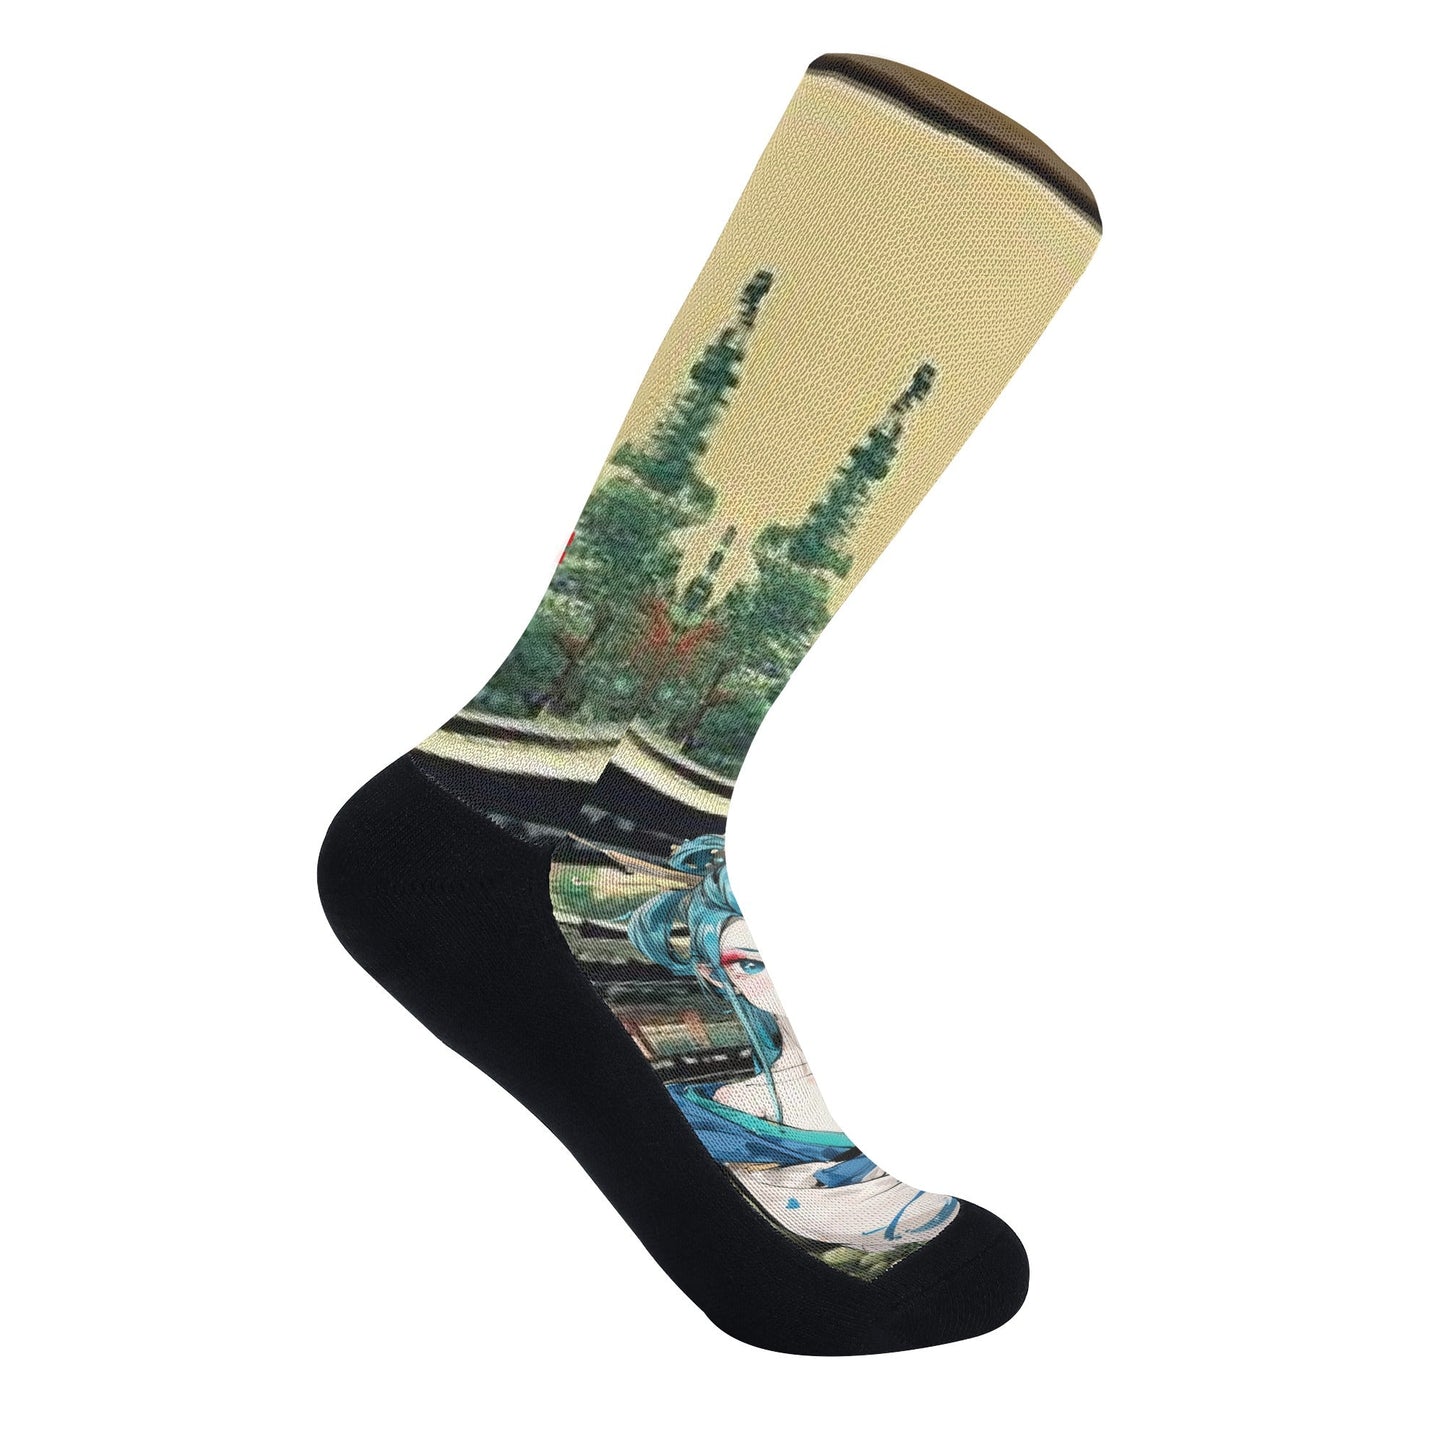 Stand out  with the  Tokyo Nugget Crew Socks  available at Hey Nugget. Grab yours today!